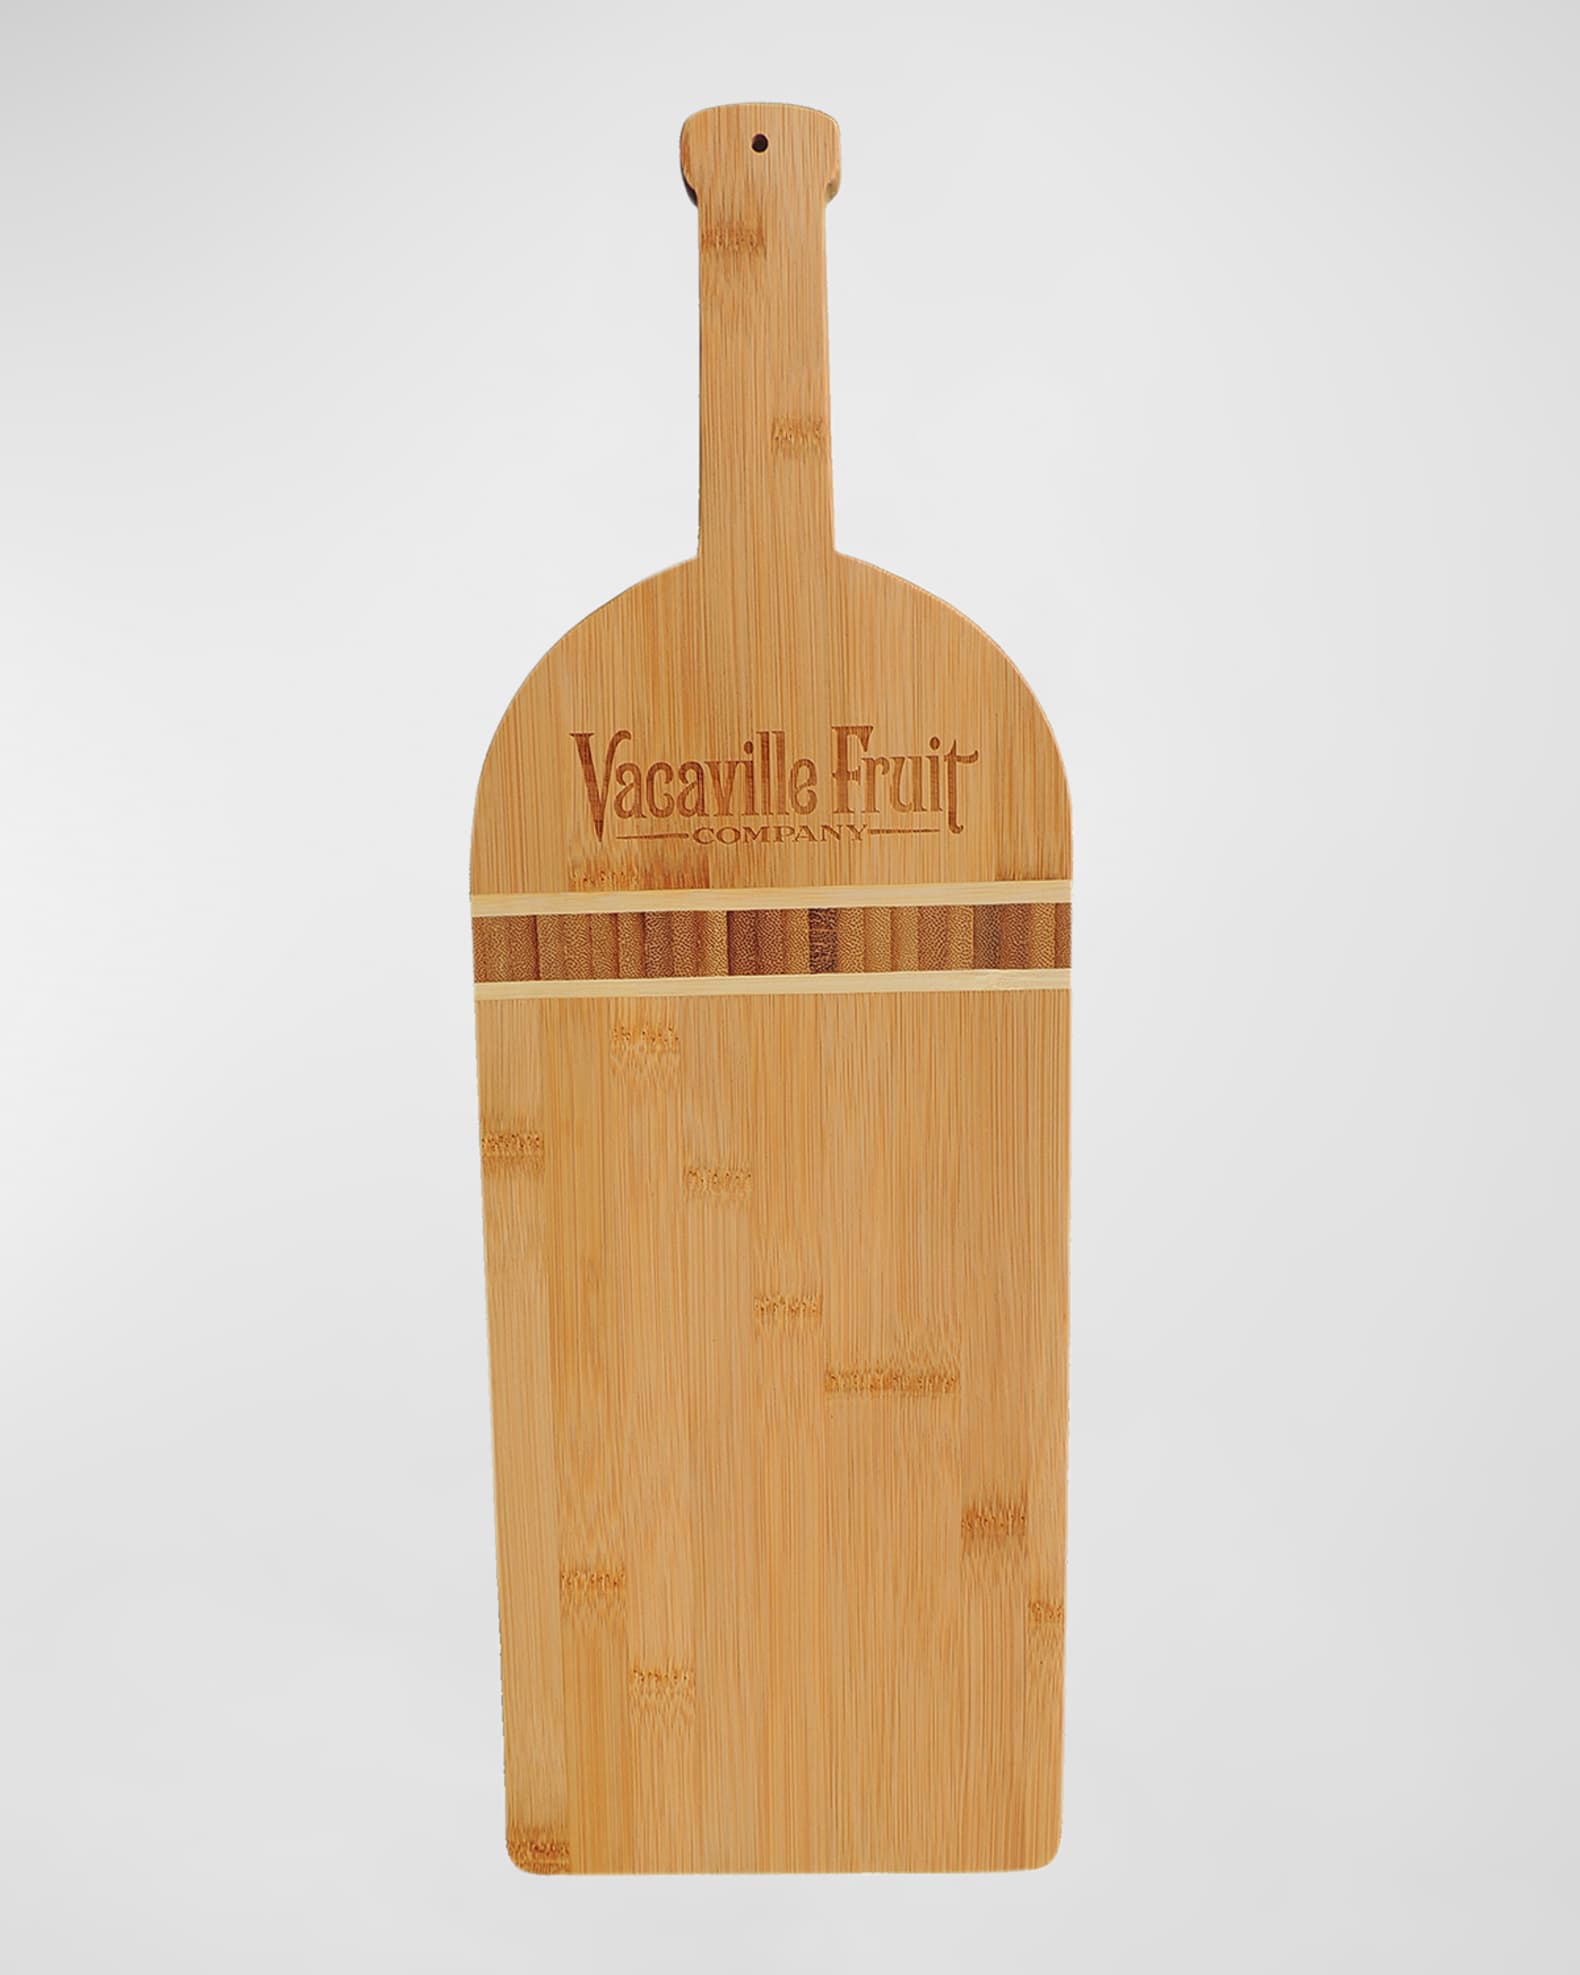 Vacaville Fruit Co. Wine-Shaped Bamboo Dried Fruit and Nut Cutting Board